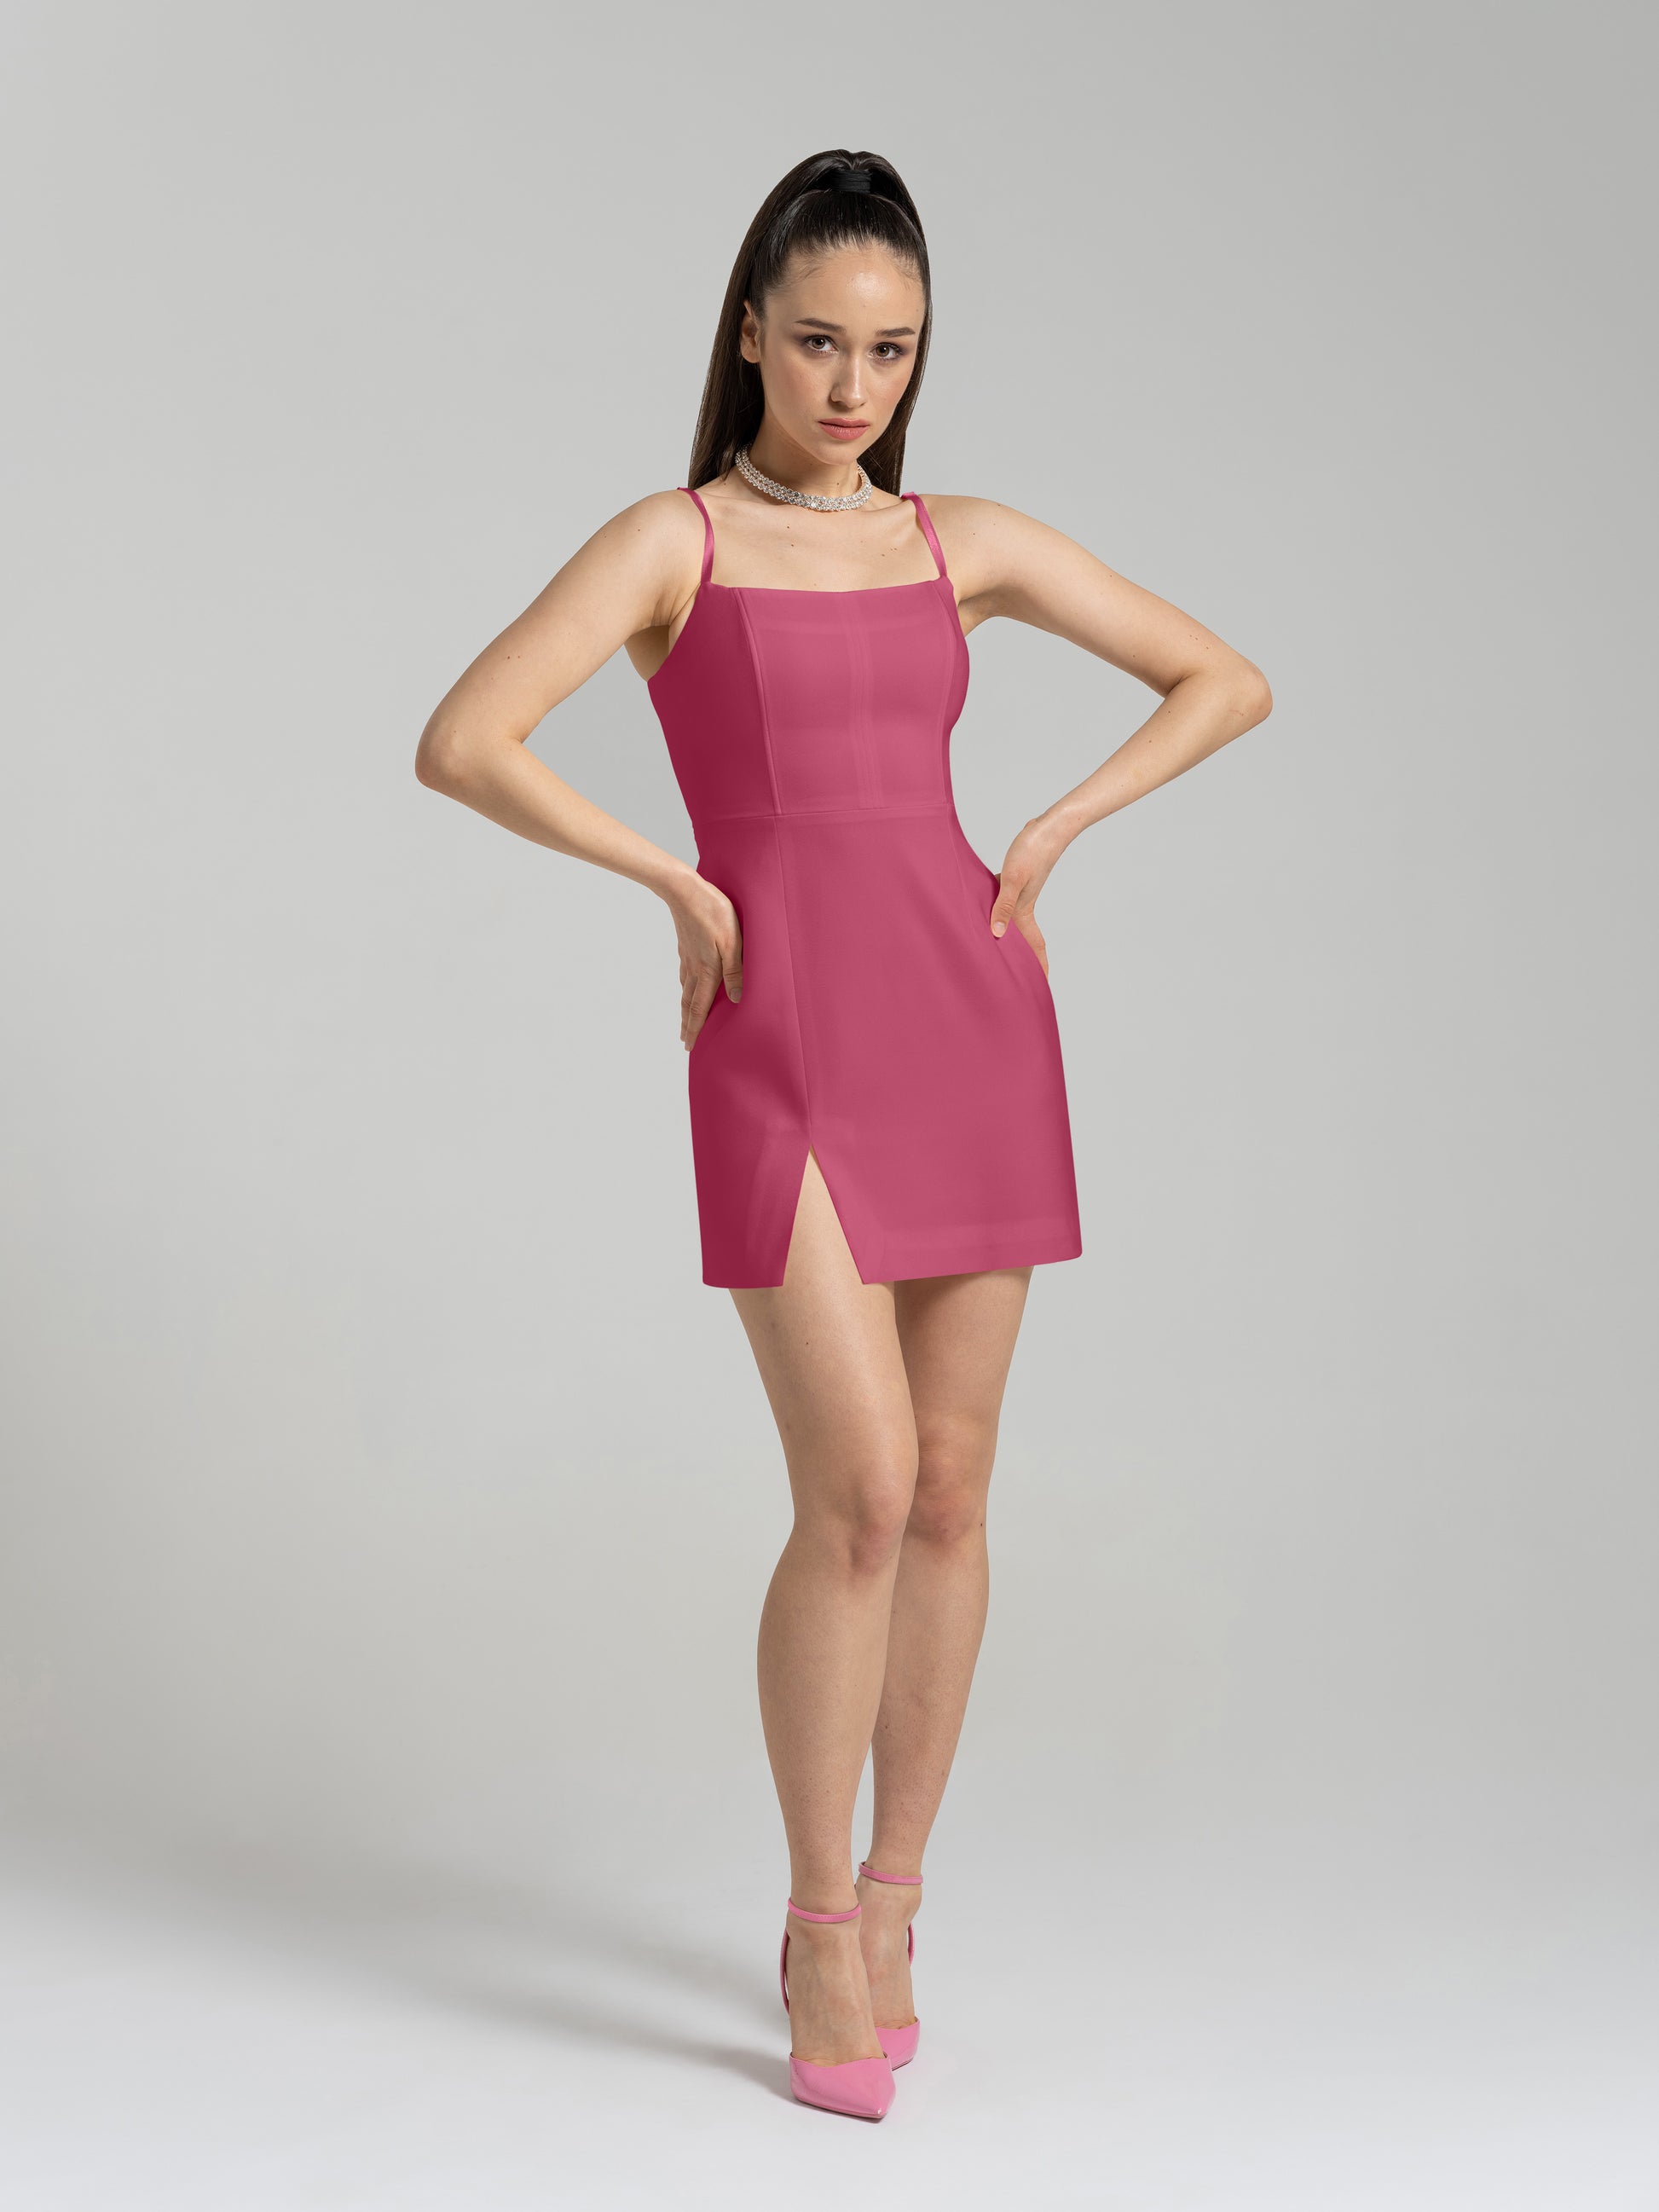 Into You Fitted Mini Dress - Super Pink by Tia Dorraine Women's Luxury Fashion Designer Clothing Brand